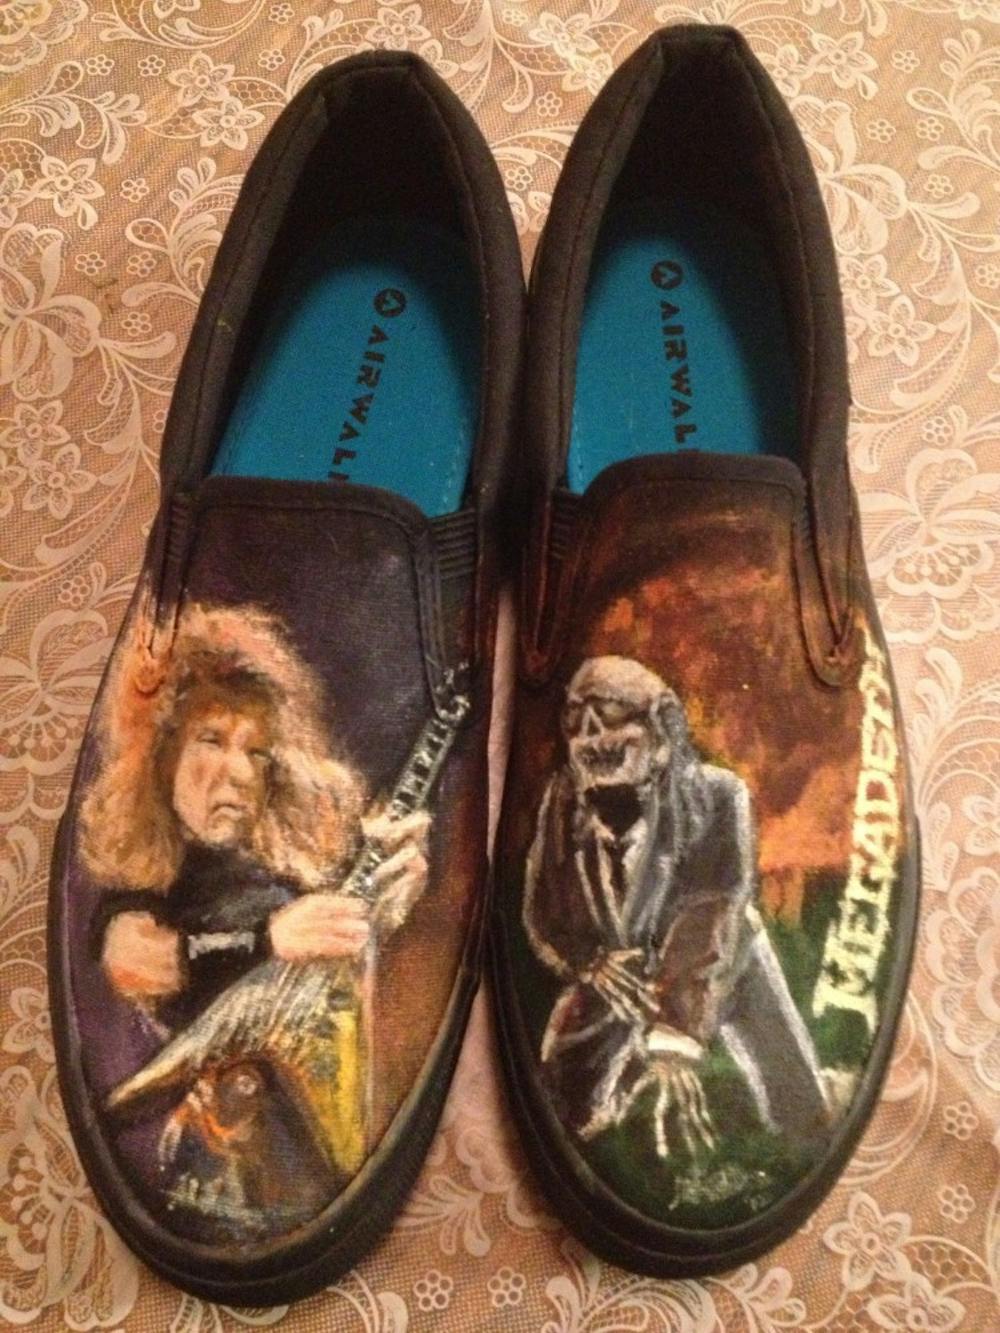 Megadeth, a classic rock band, themed canvas shoes. Acrylic paint was used. Photo by Alec Damiano.